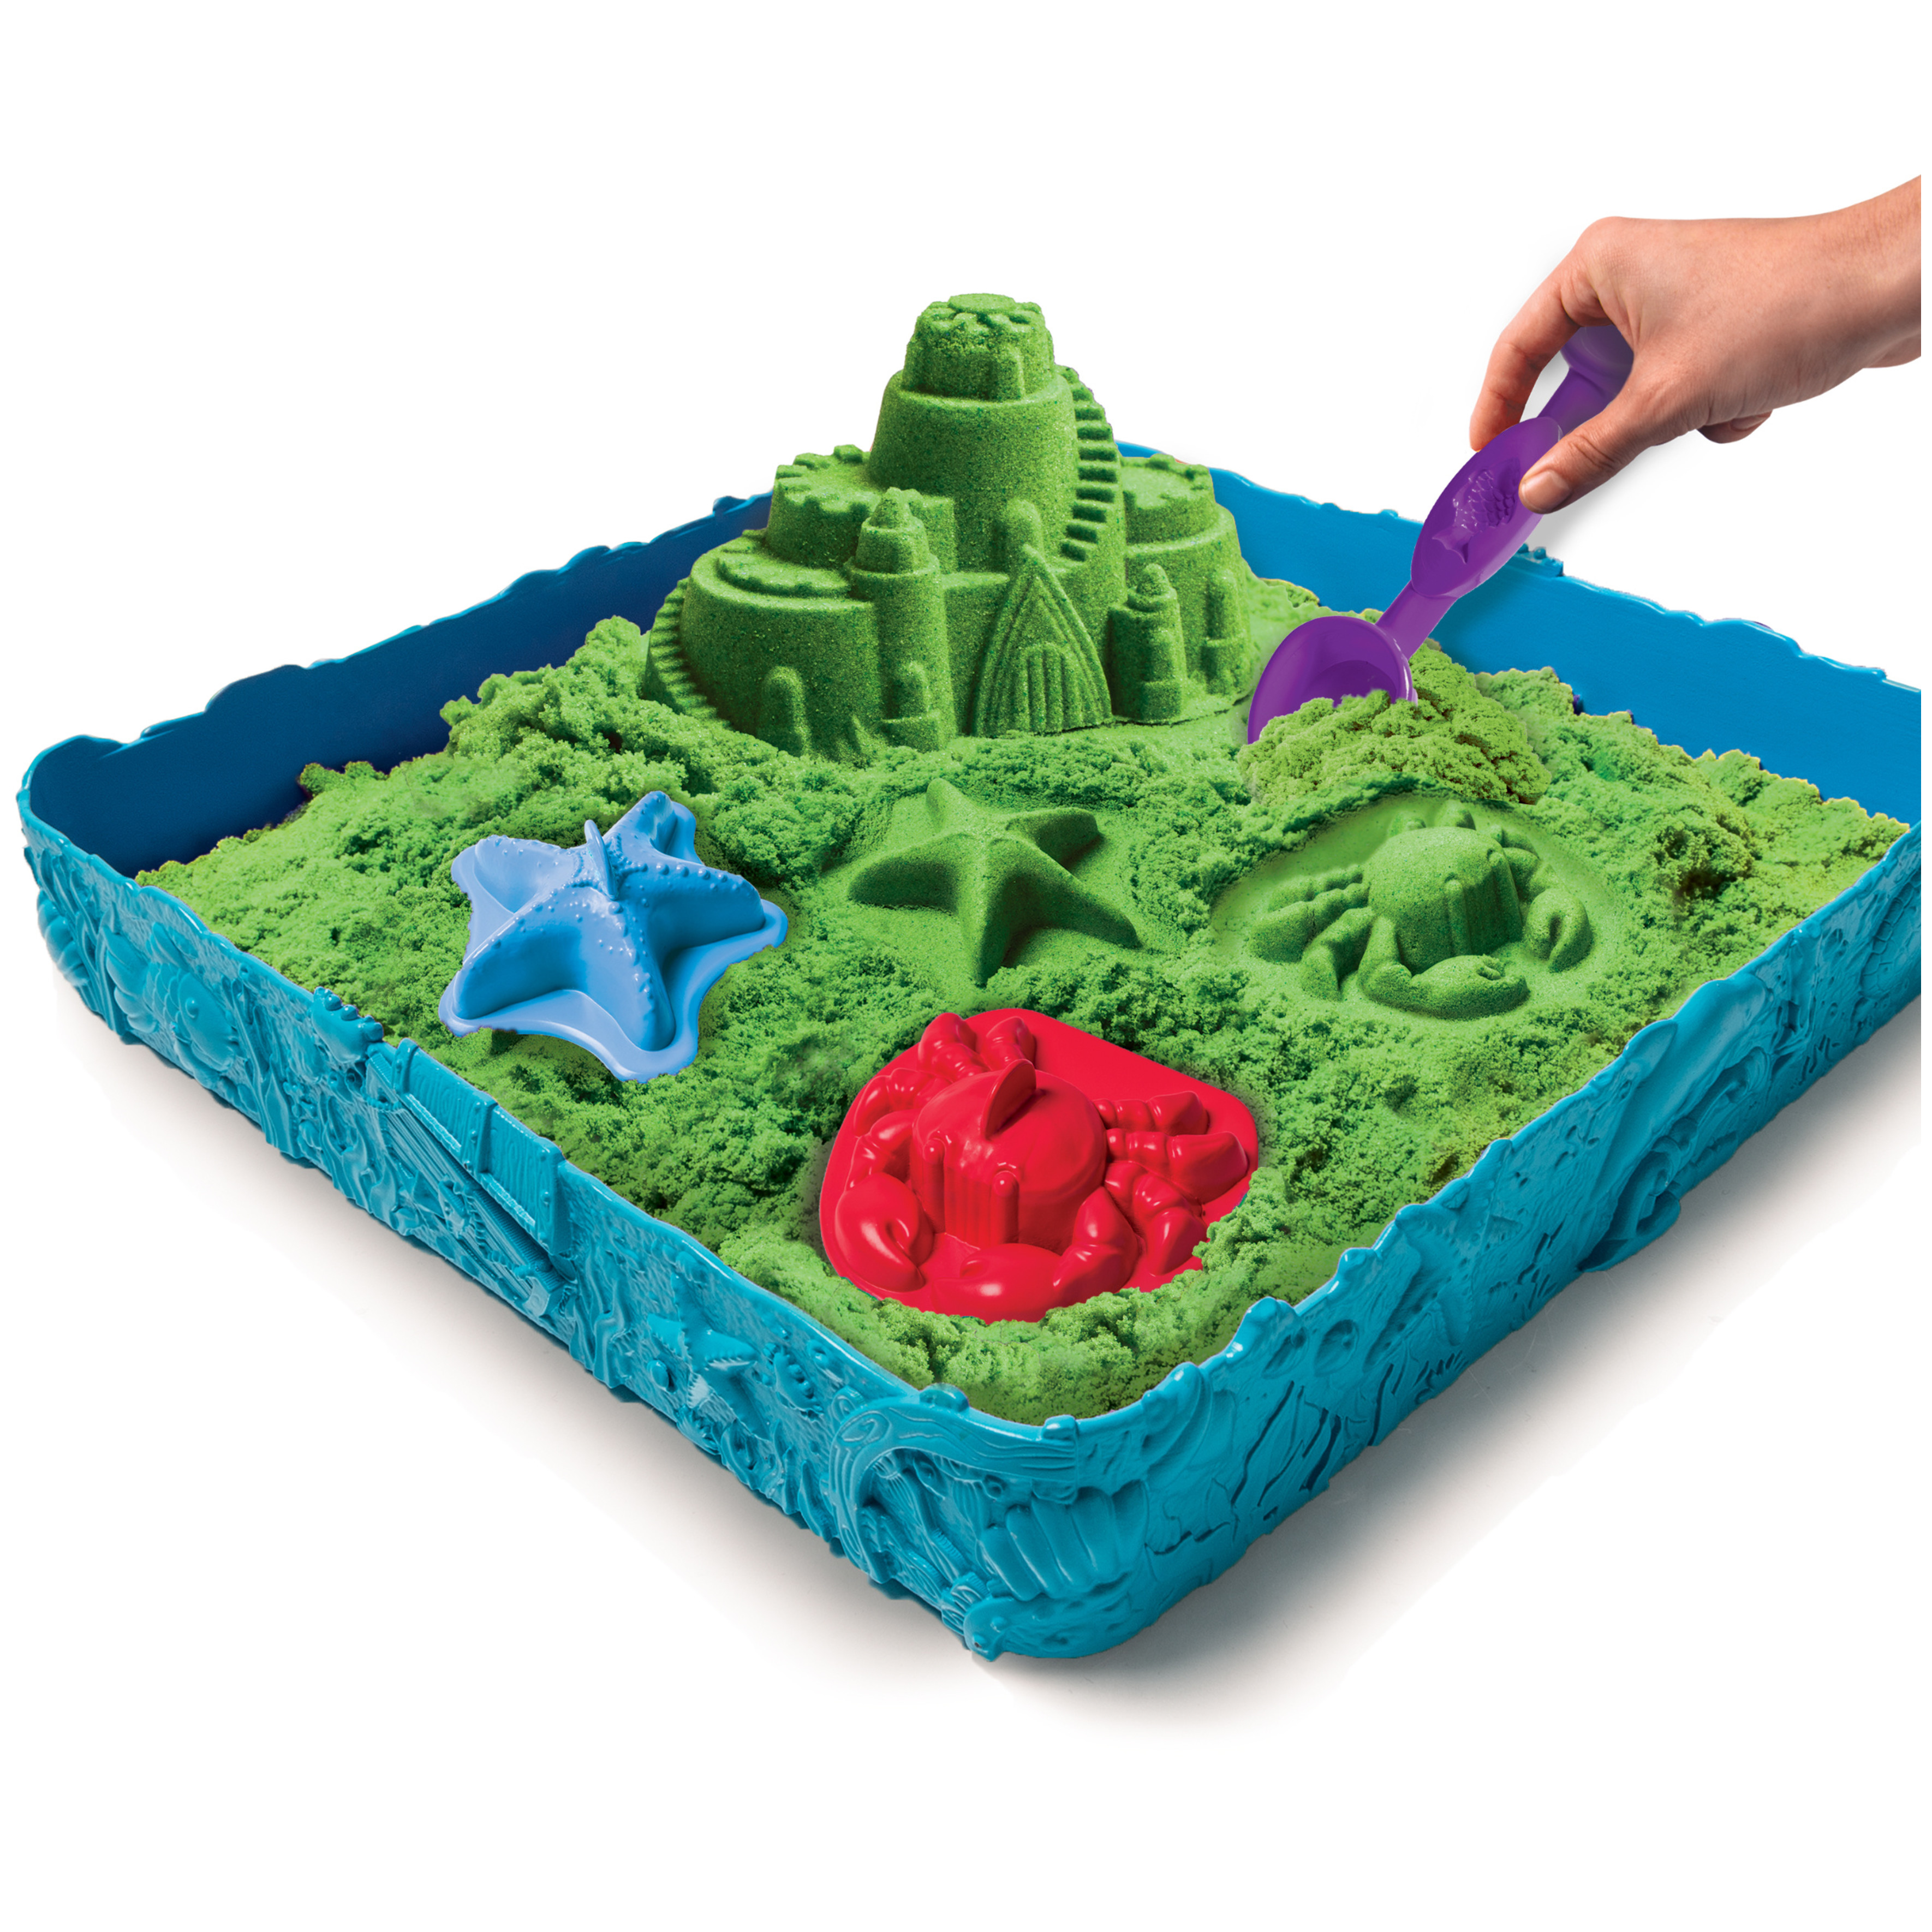 Kinetic Sand Sandcastle Set with 1lb of Kinetic Sand and Tools and Molds (Color May Vary) - image 4 of 9